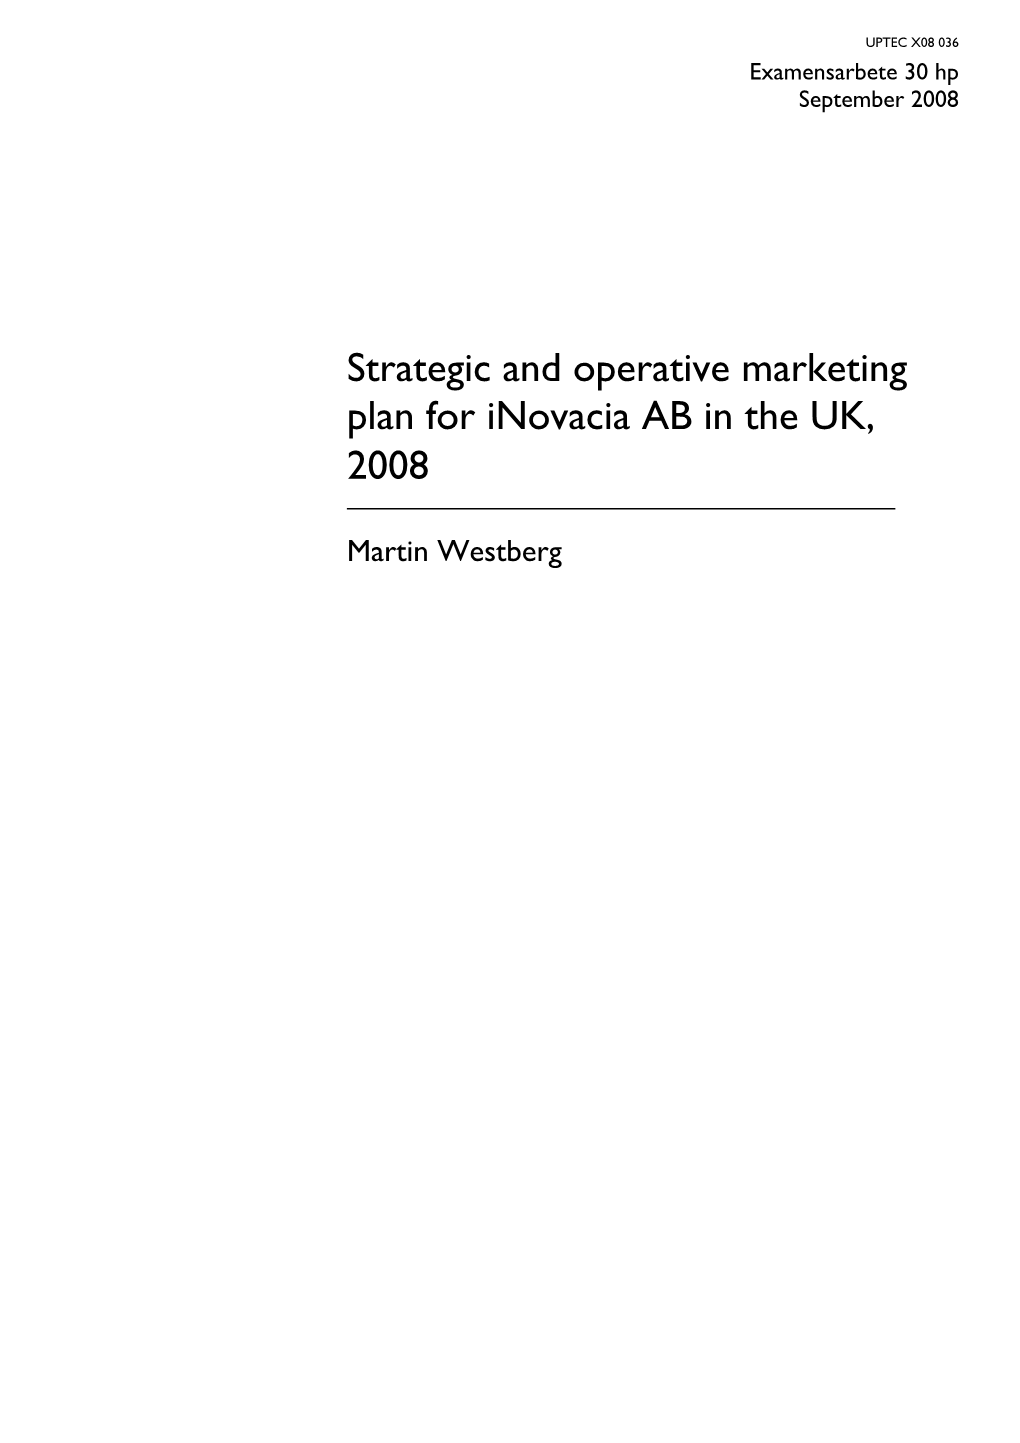 Strategic and Operative Marketing Plan for Inovacia AB in the UK, 2008